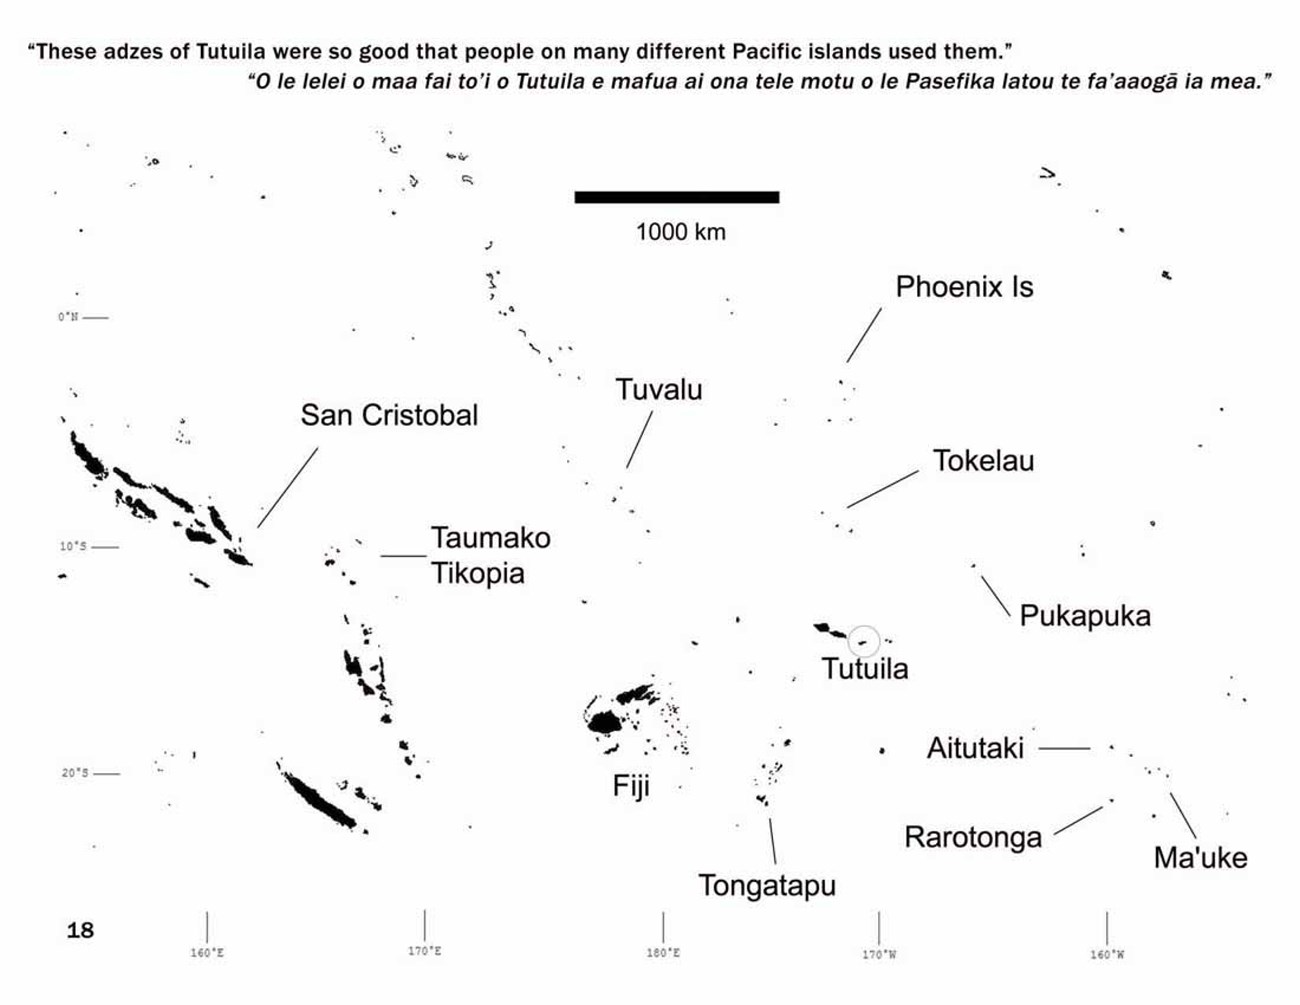 Map of the Pacific islands Tutuila is in the center and a circle is drawn around one of its islands.